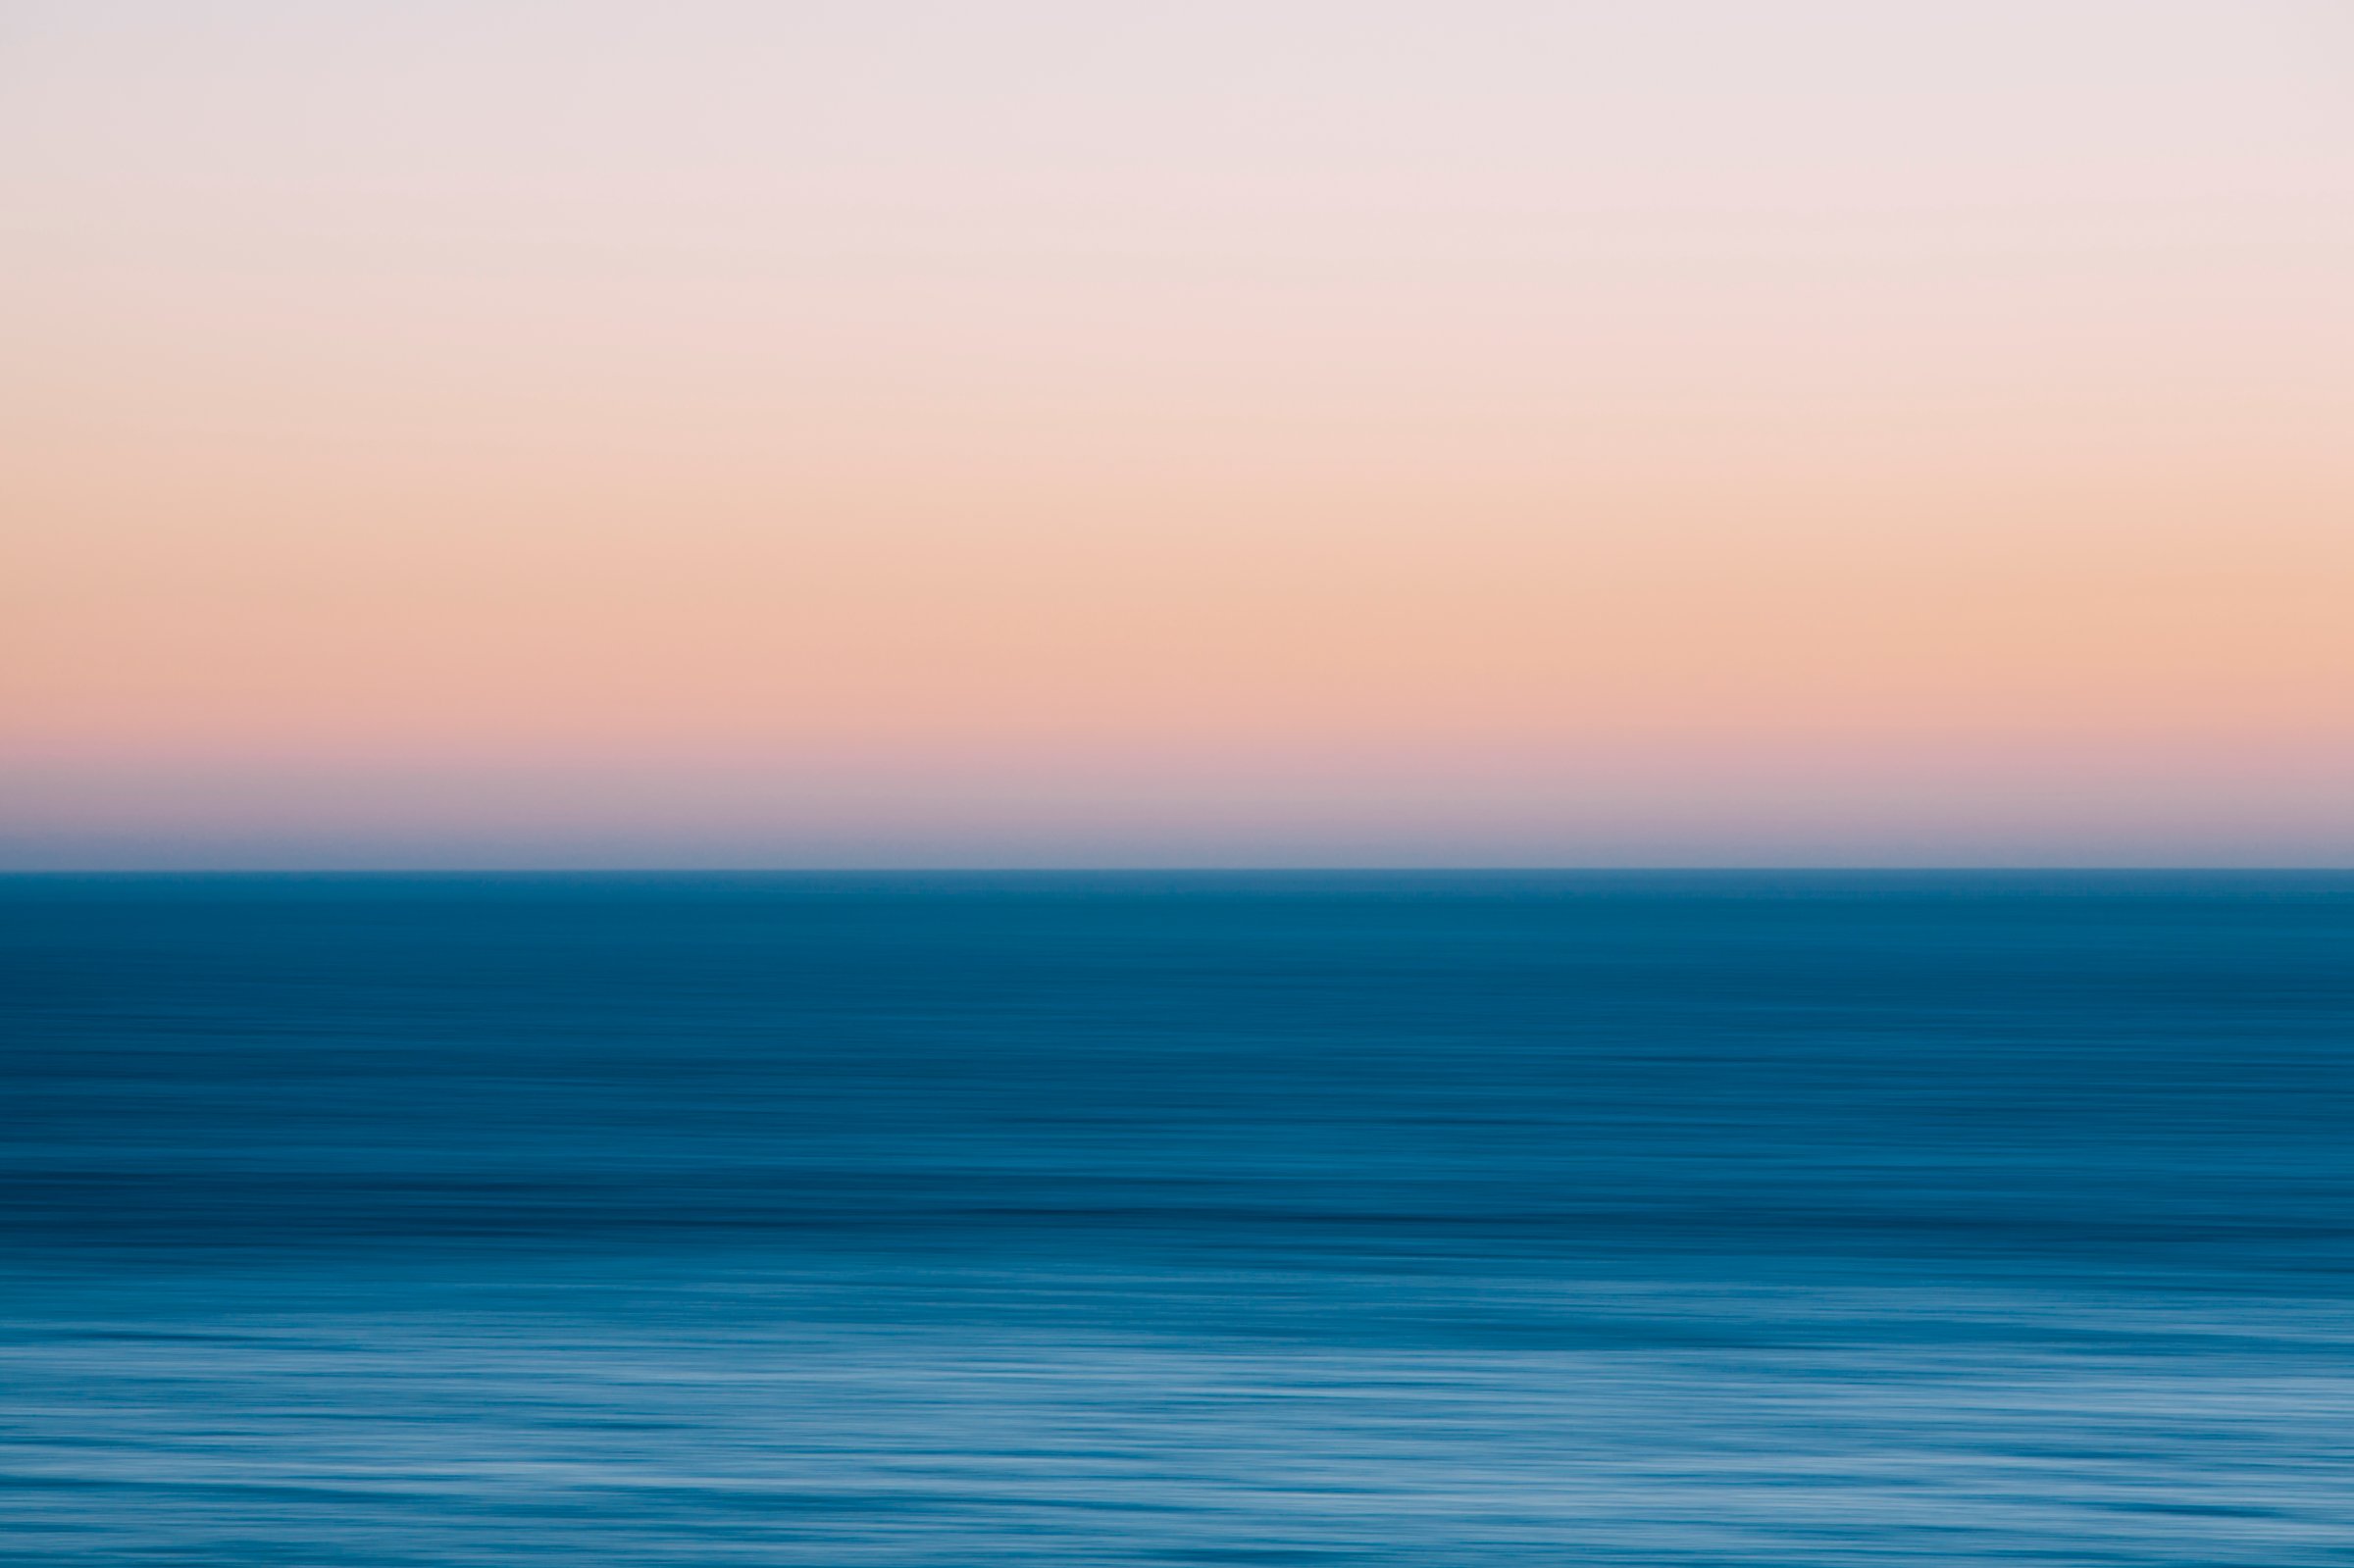 A view out to sea over the Pacific Ocean at dusk. Blurred motion.